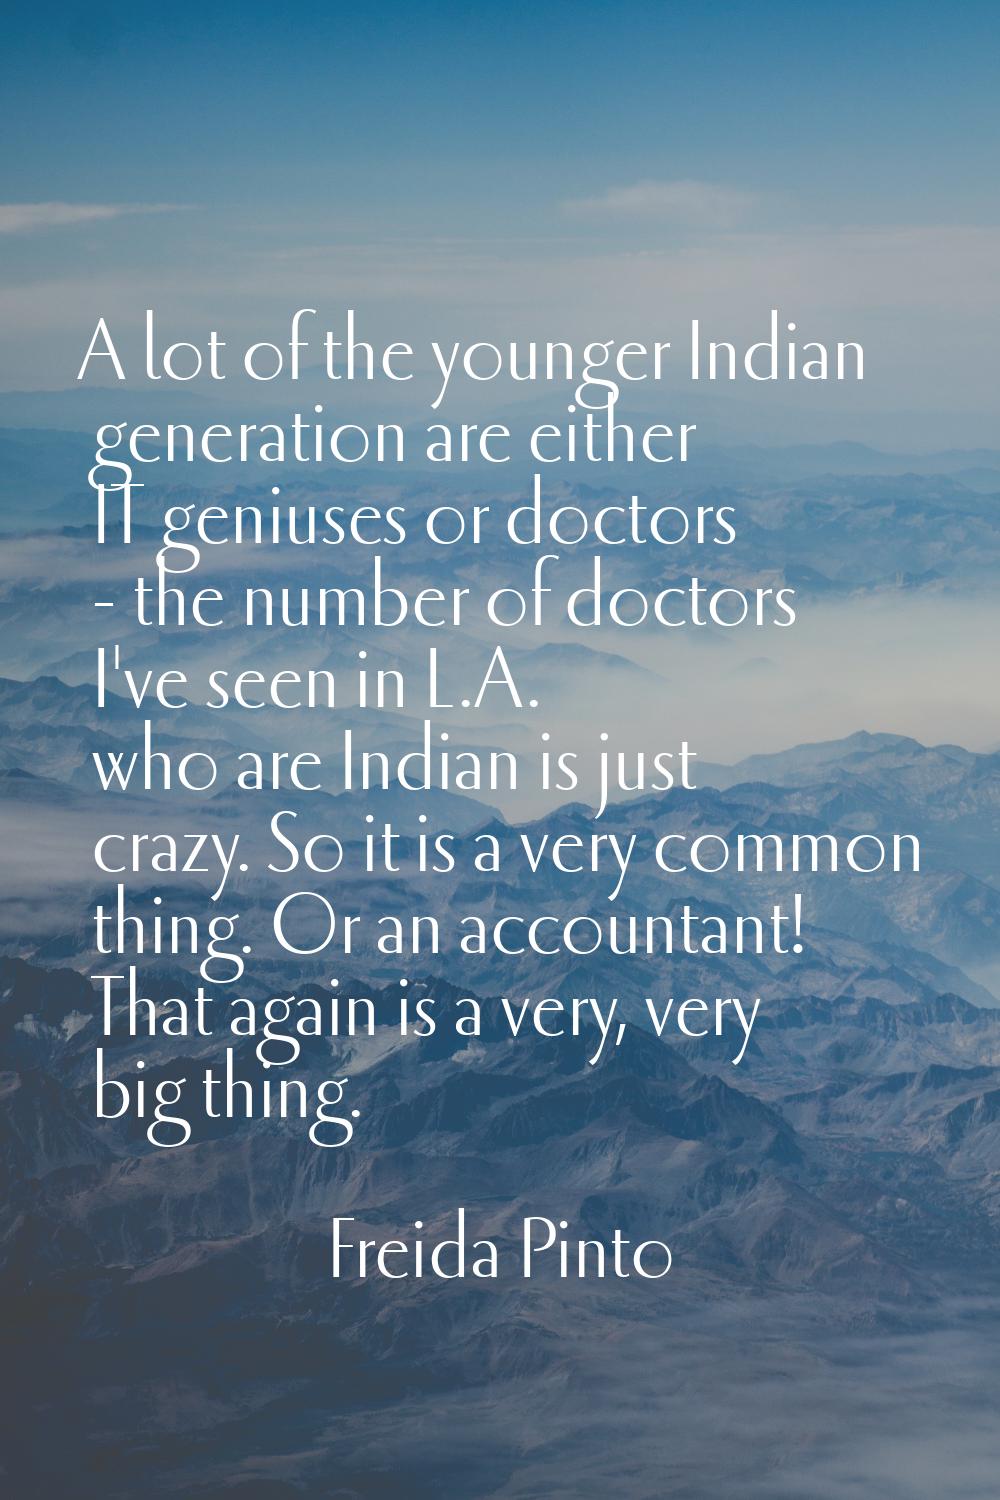 A lot of the younger Indian generation are either IT geniuses or doctors - the number of doctors I'